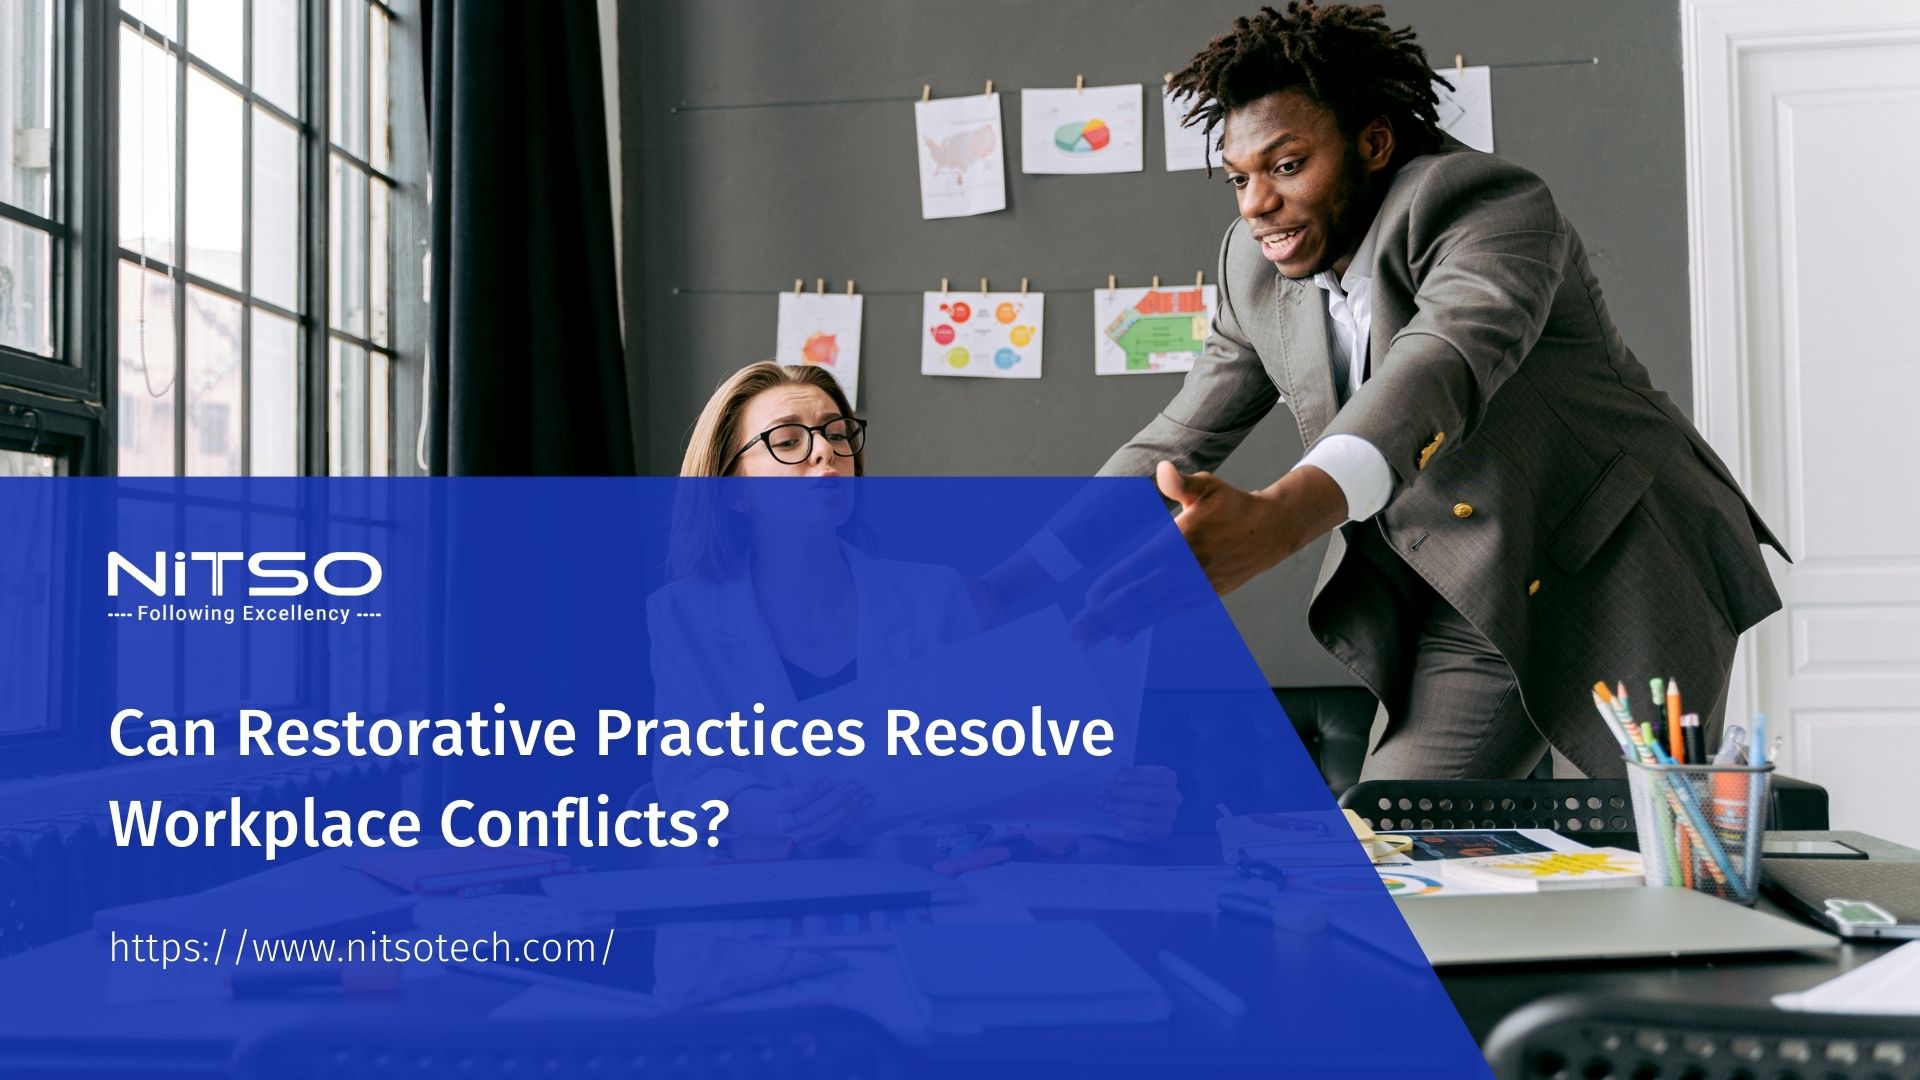 Can Restorative Practices Resolve Workplace Conflicts?